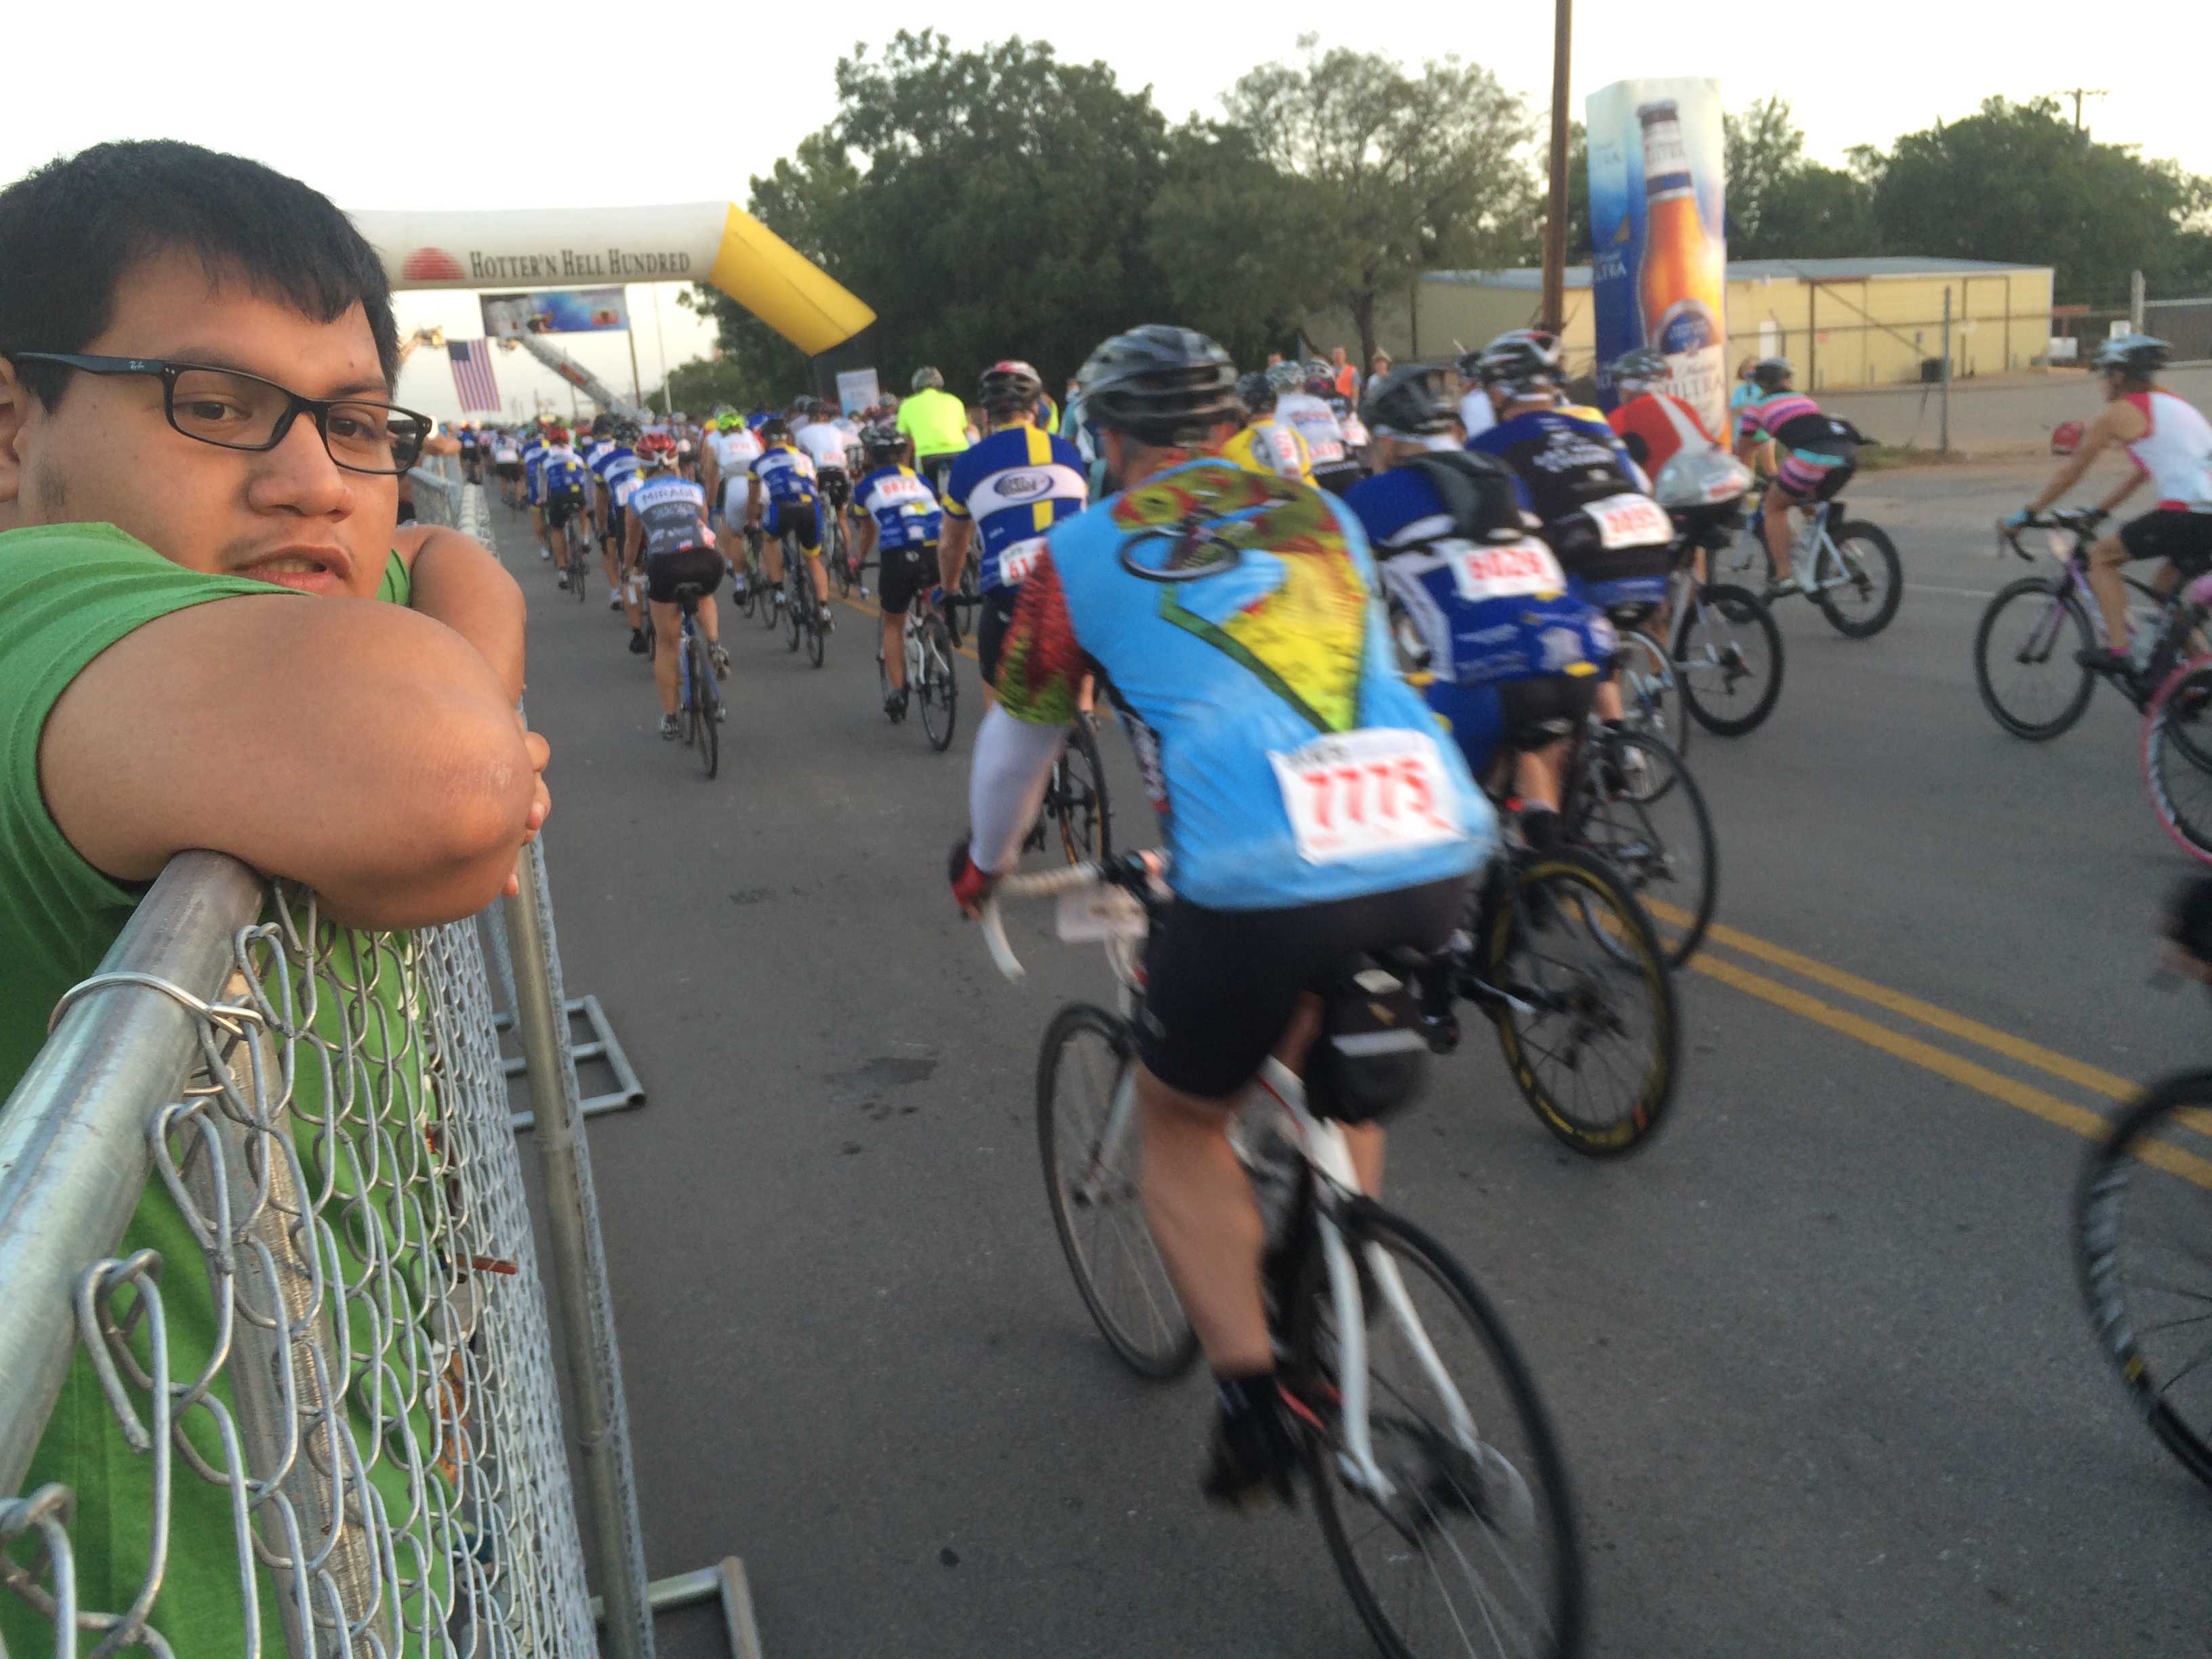 Marco Torres, psychology senior, watches the endless stream of racers leave the starting gates as he waits to deflate and transfer "Pyro Pete" to the Hell's Gate rest stop in Burkburnett. Photo by Ethan Metcalf